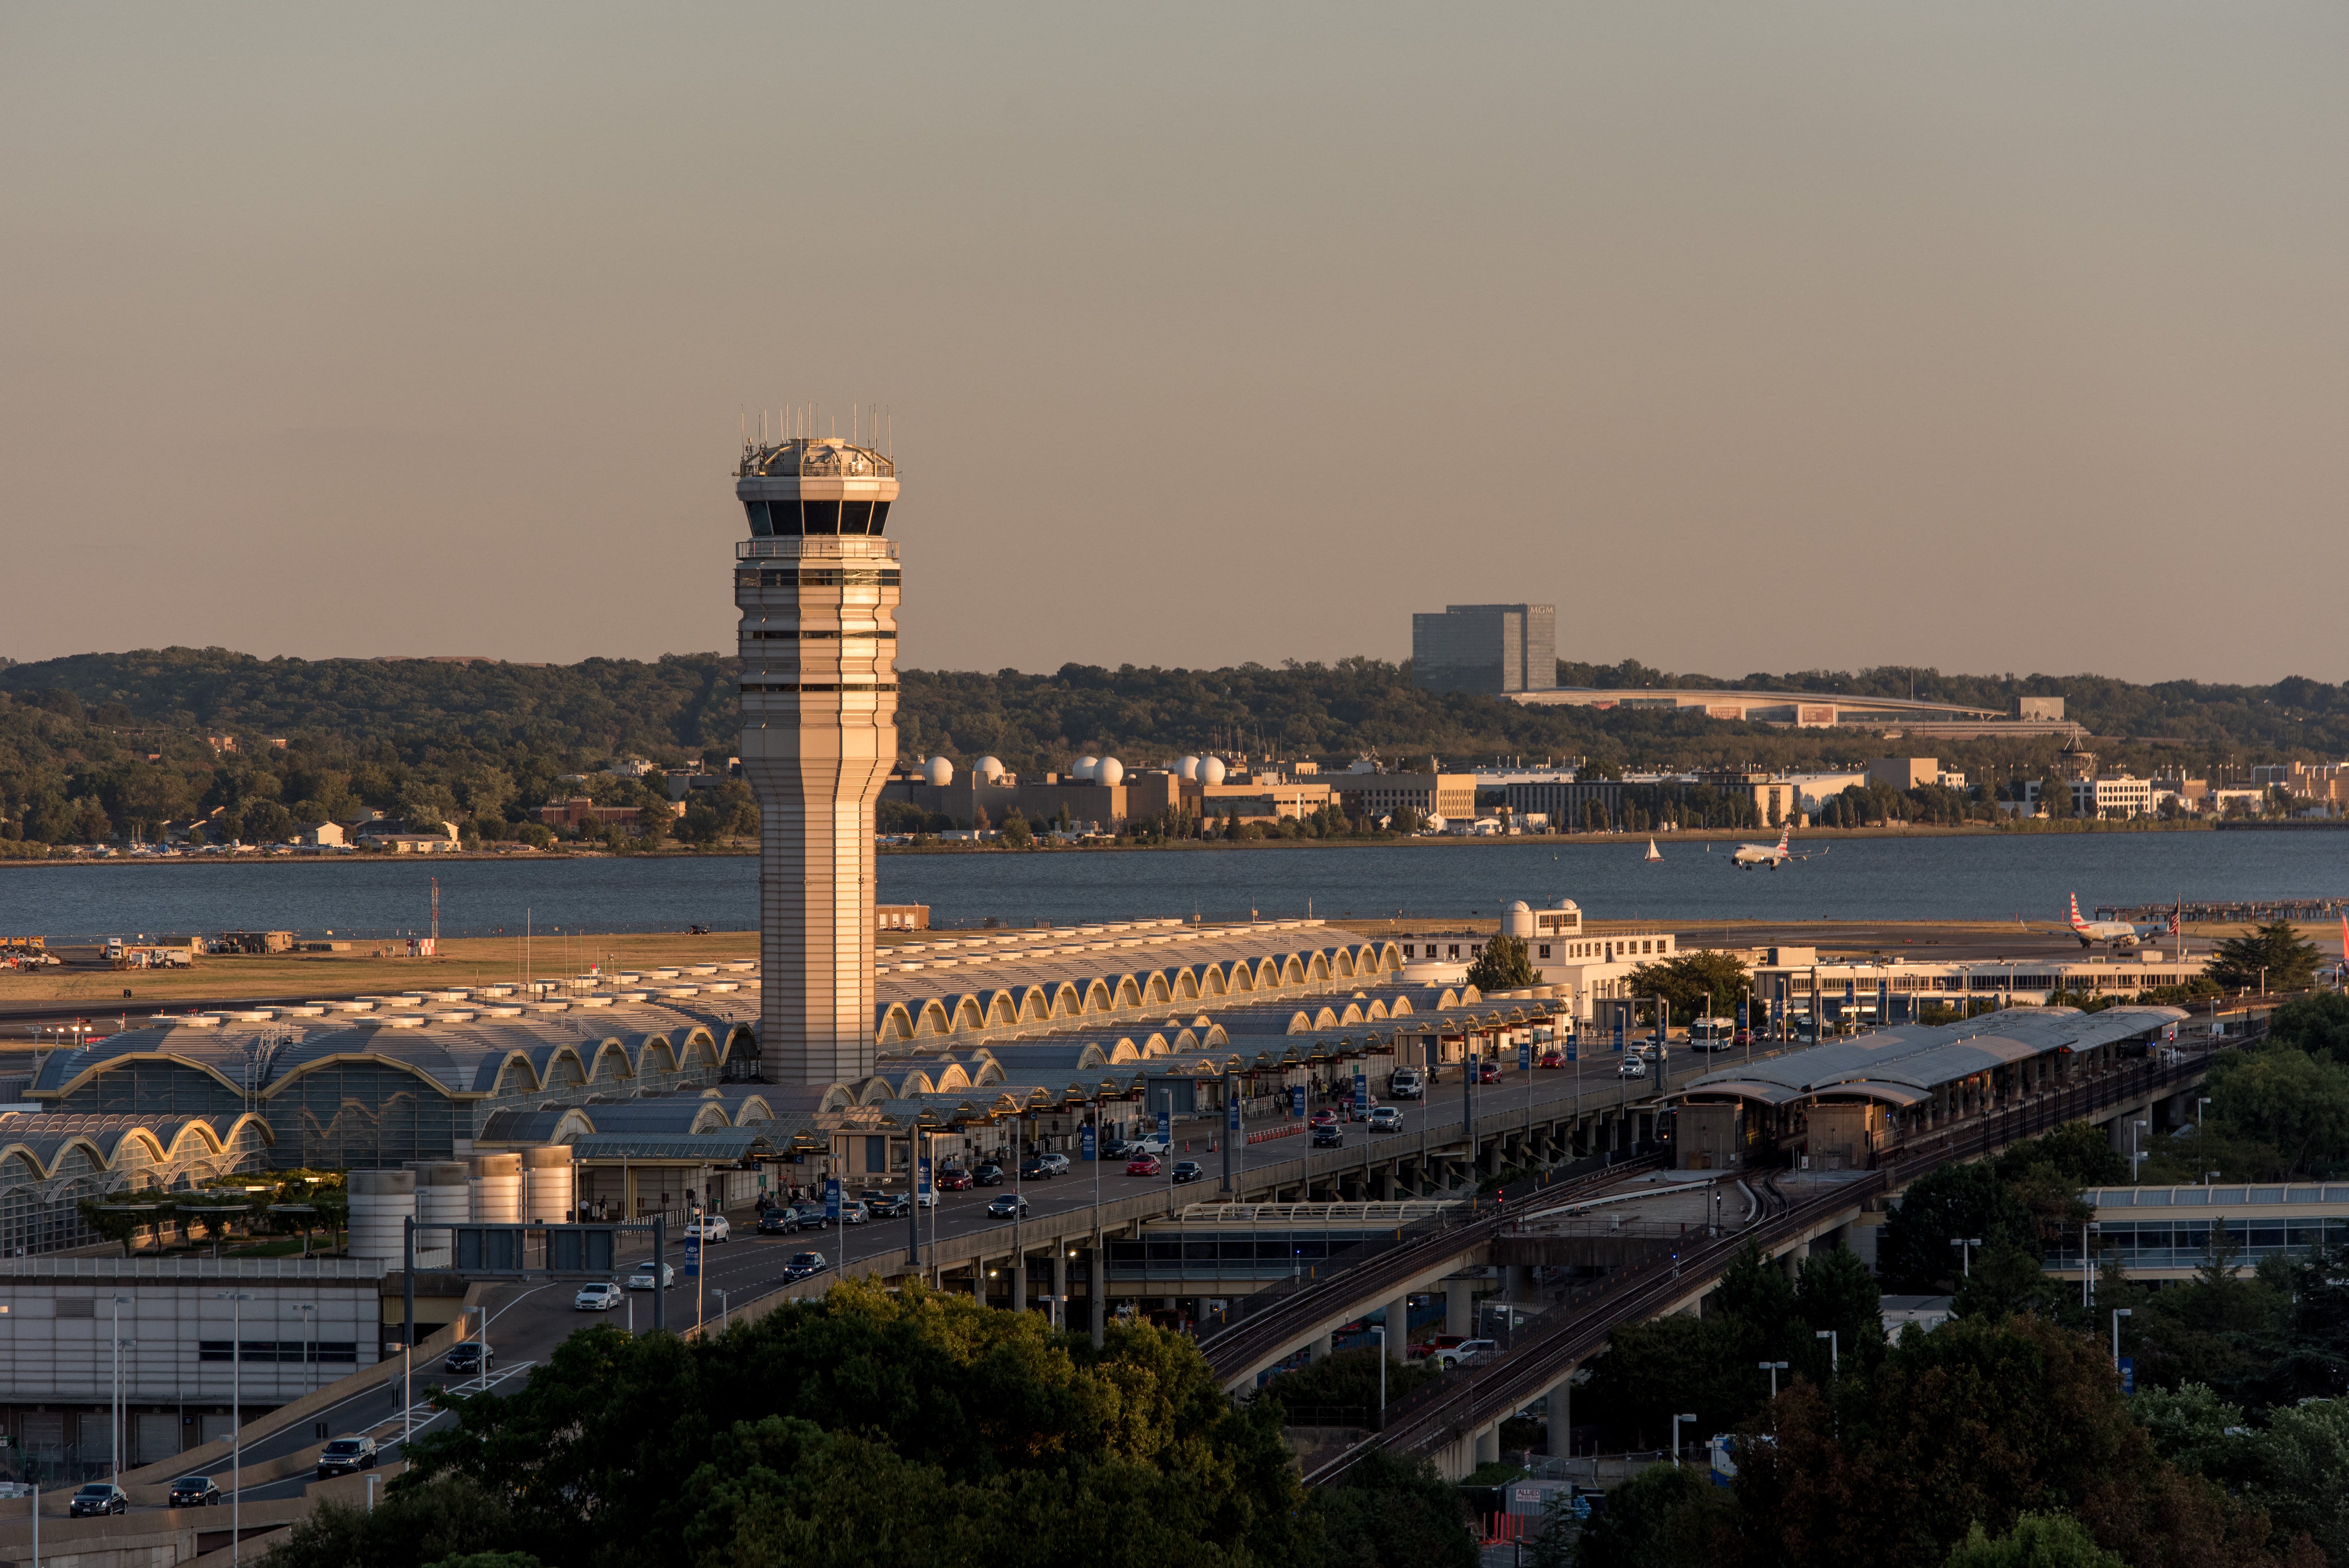 Minutes away from Reagan National Airport